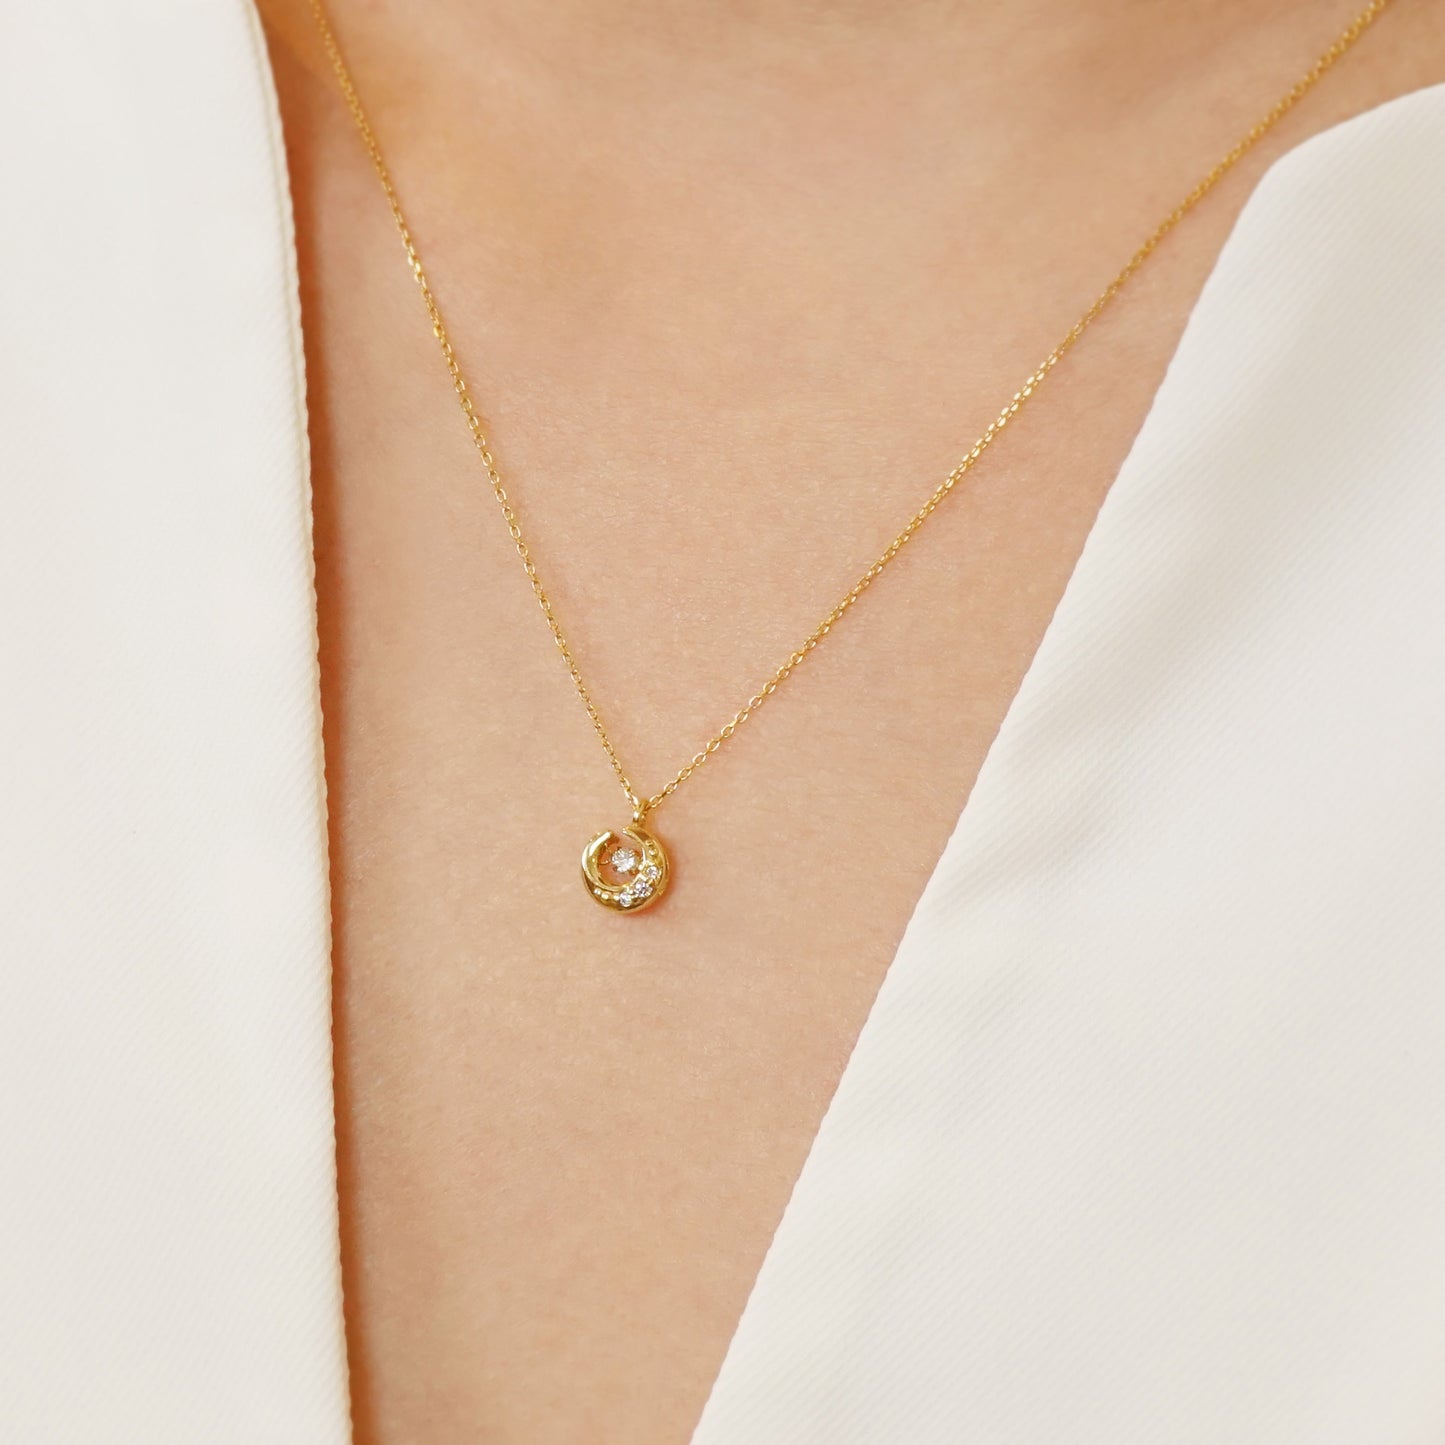 18K Yellow Gold Dancing Diamond Crescent Necklace - Model Image